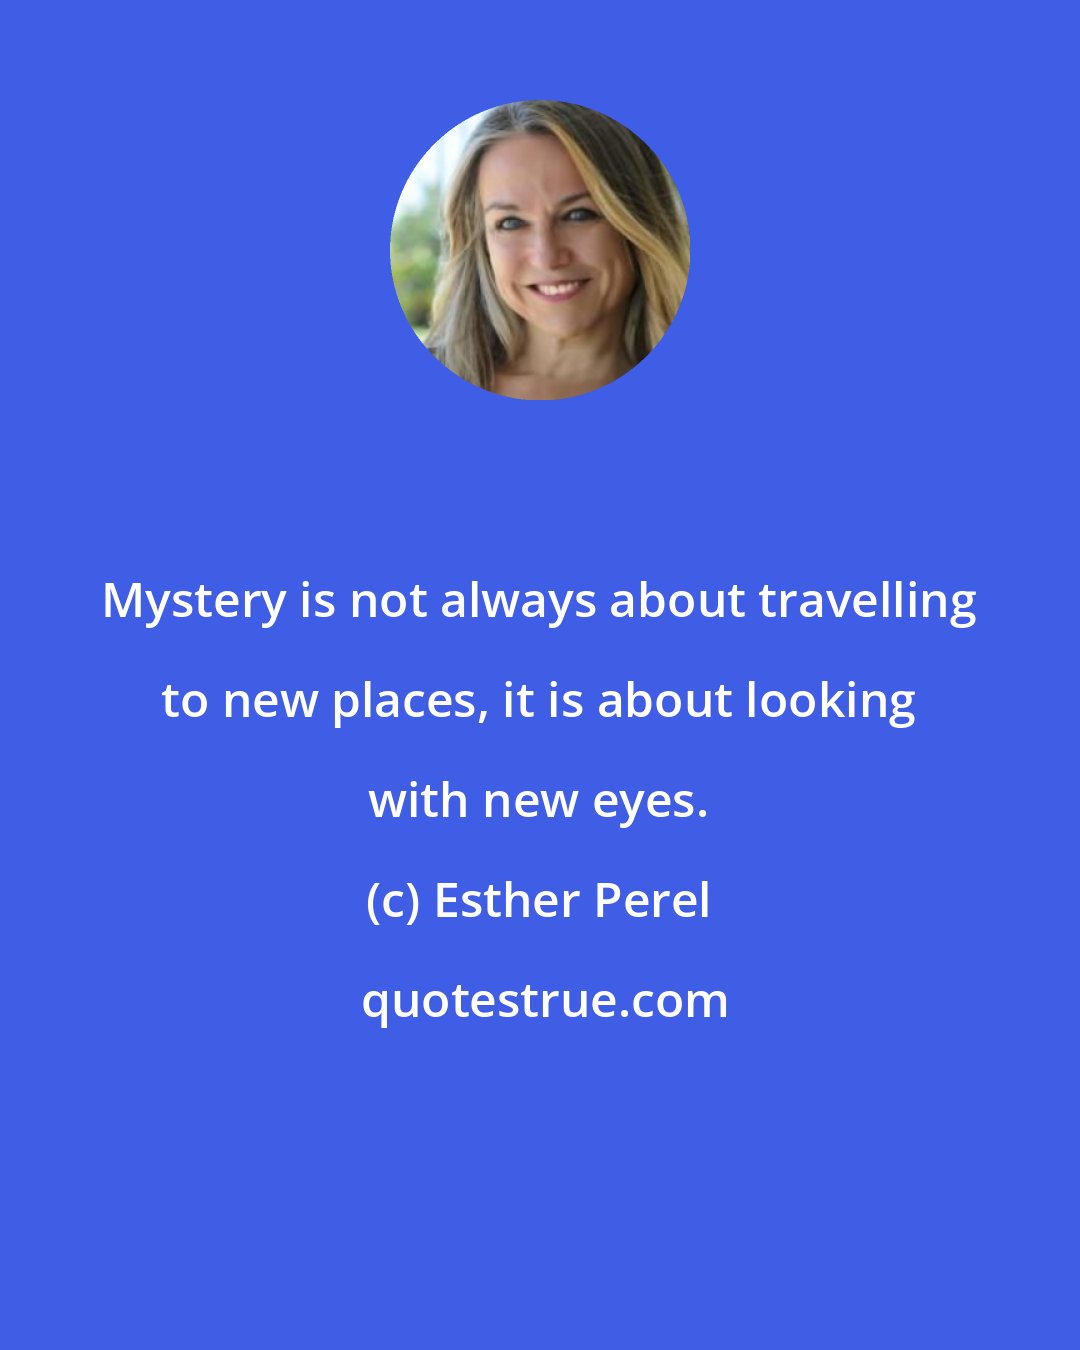 Esther Perel: Mystery is not always about travelling to new places, it is about looking with new eyes.